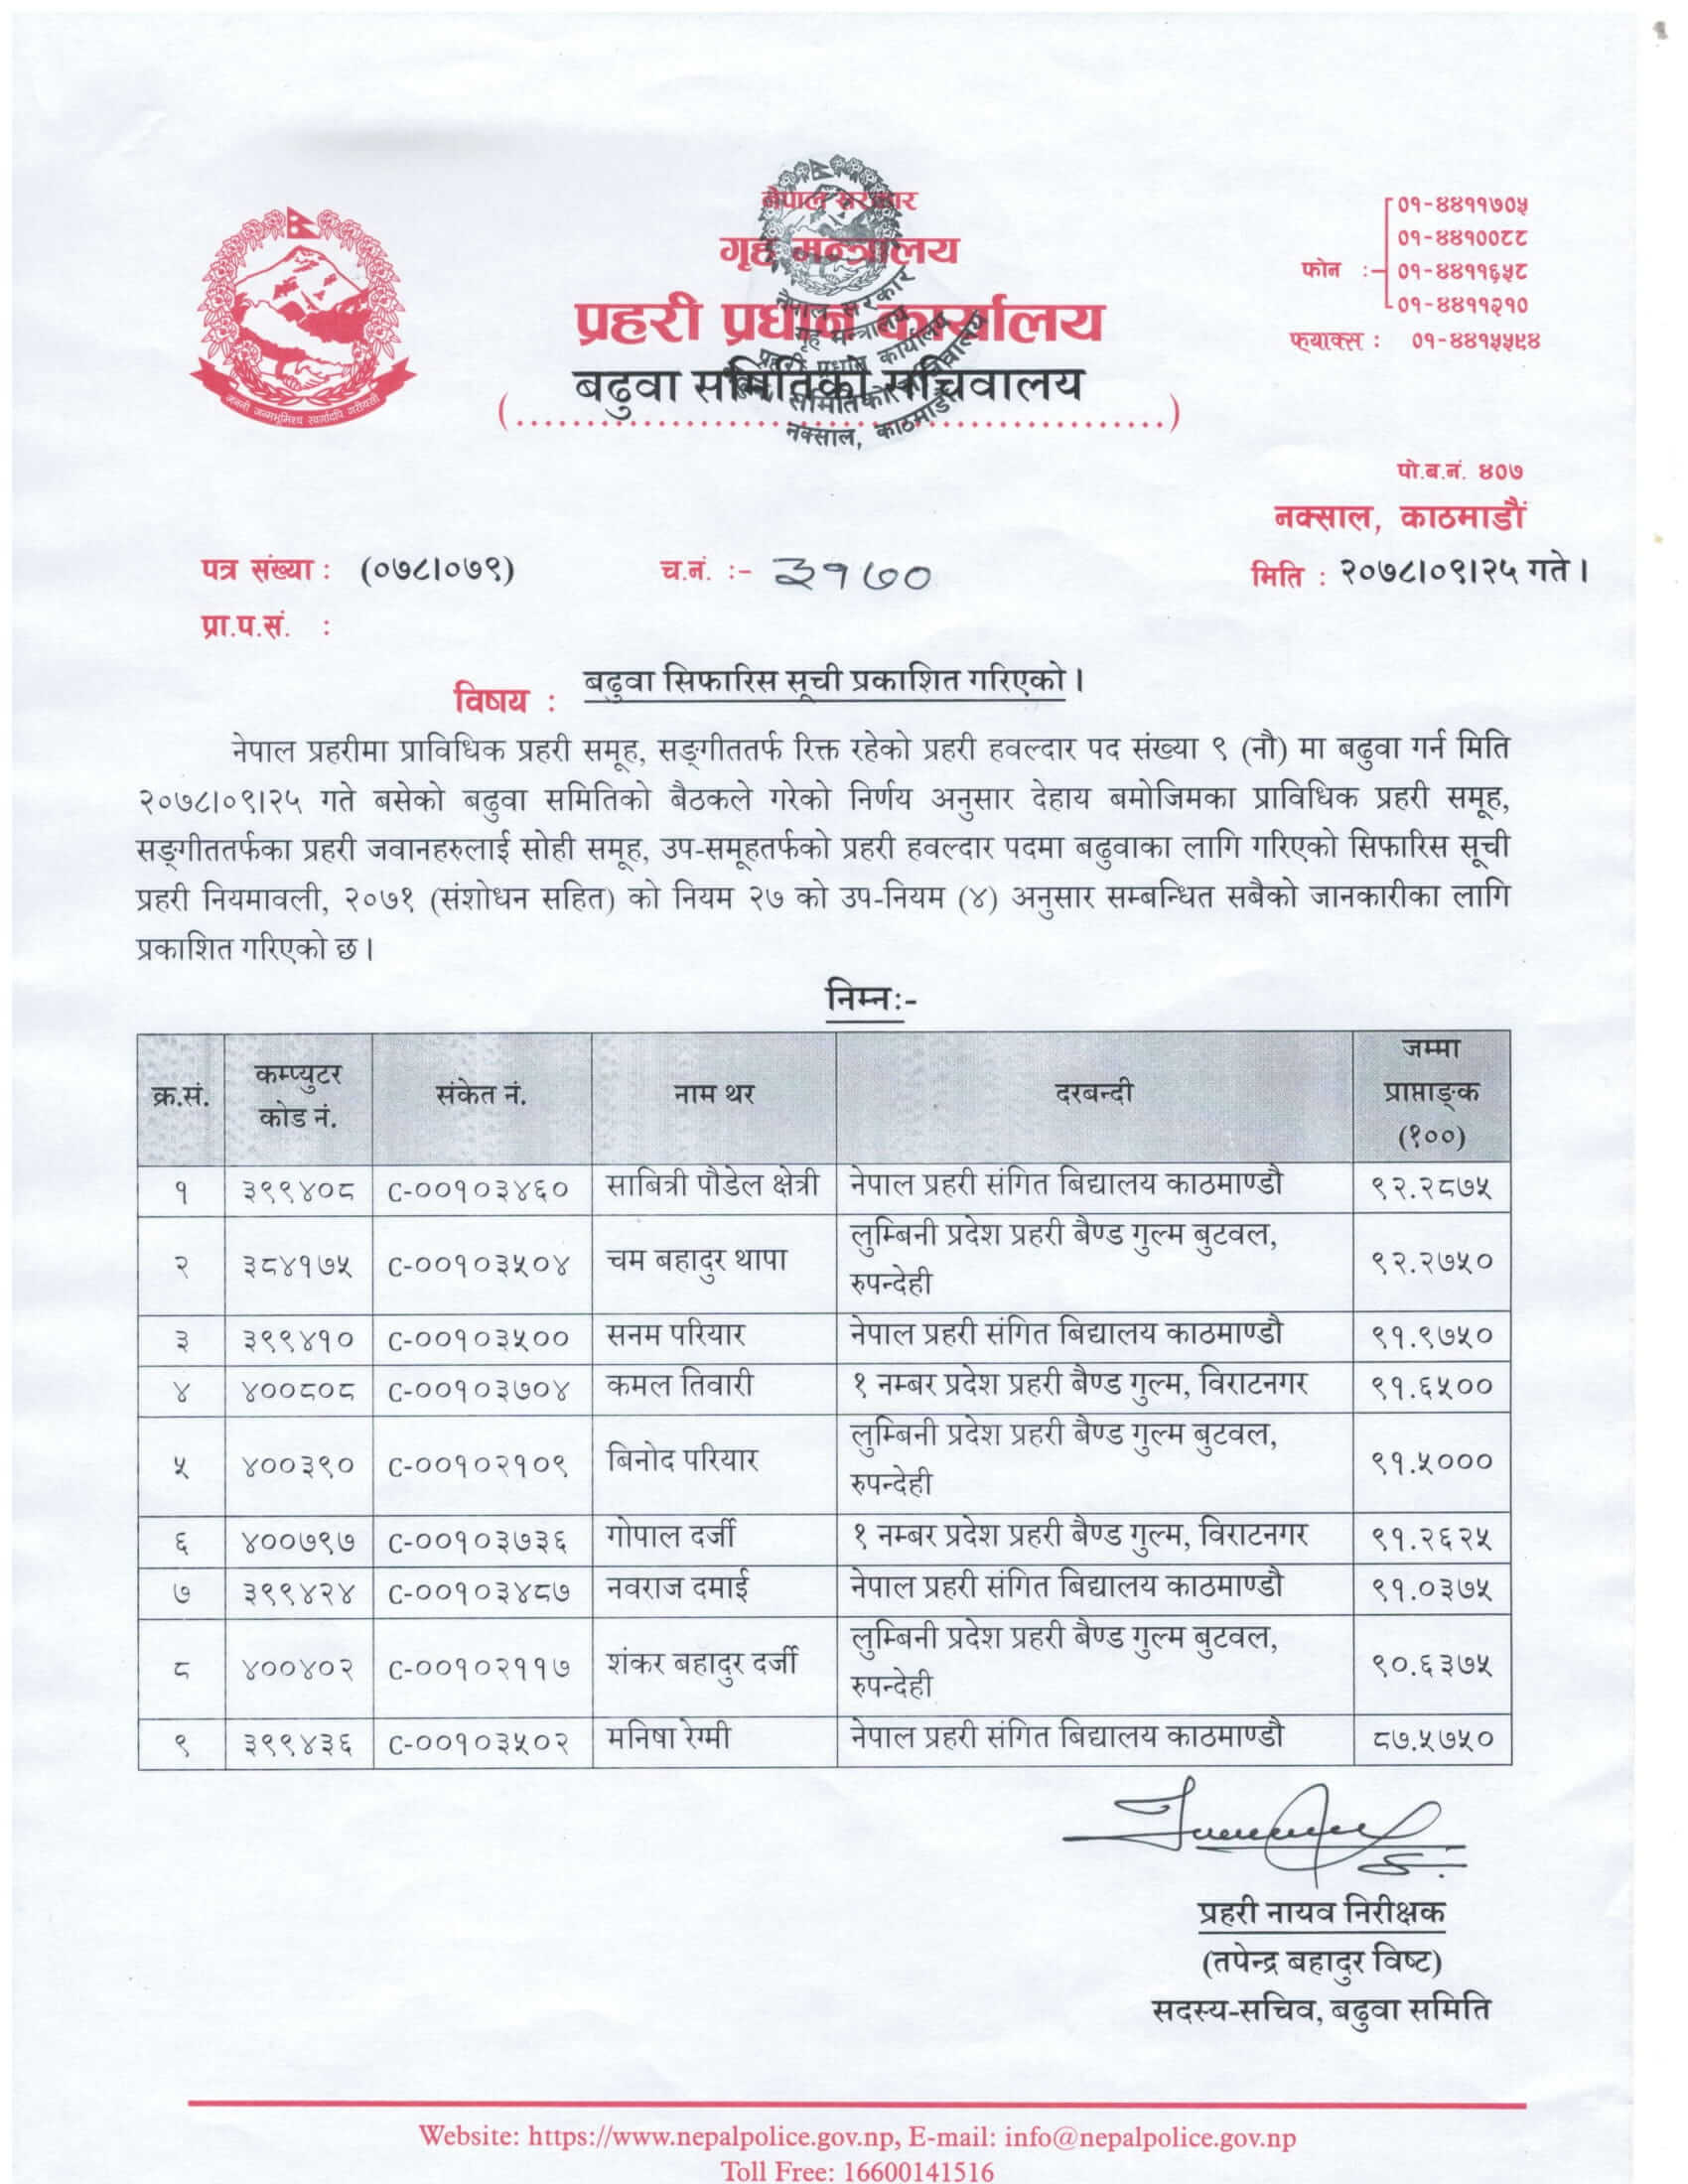 Nepal Police Technical HC (Music) Promotion Recommend List